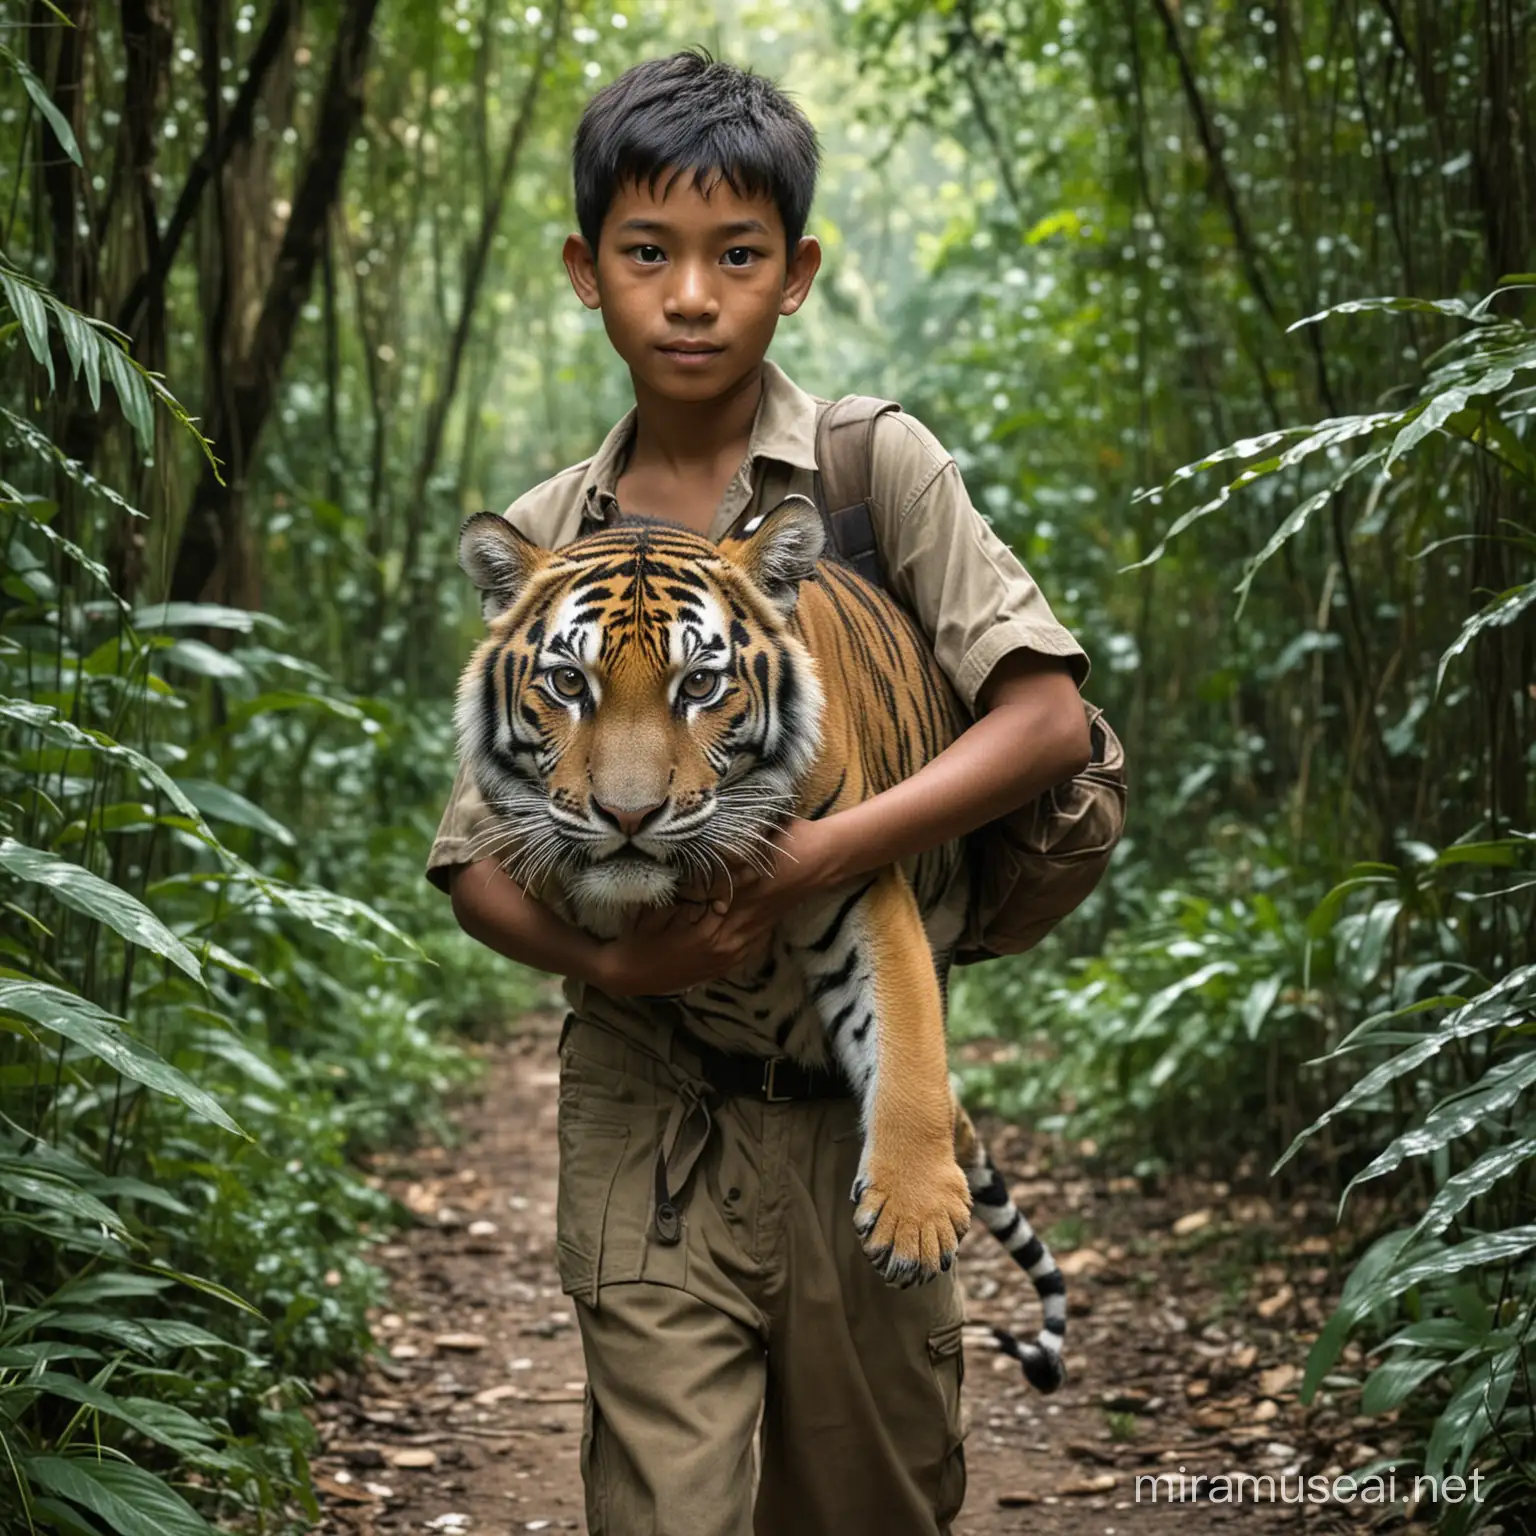 Indonesian Teen Carrying Baby Tiger in Jungle Wilderness